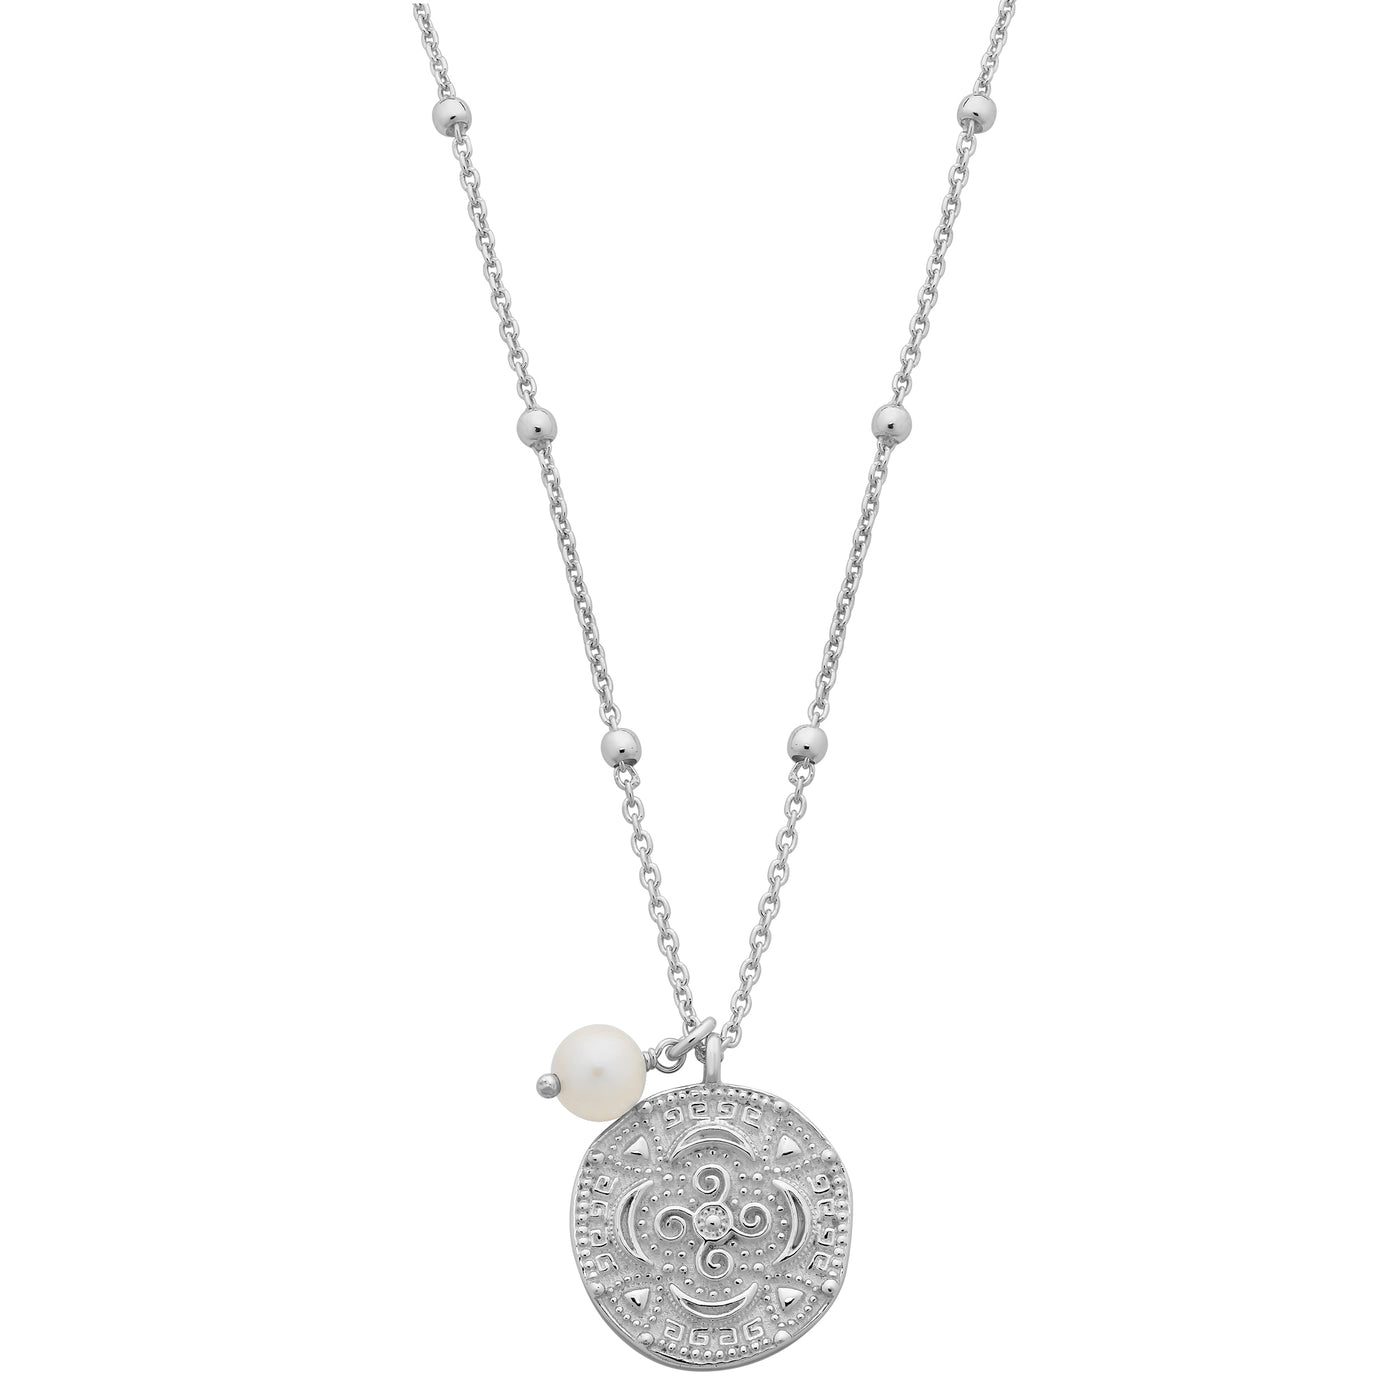 Silver Coin Necklace with White Freshwater Pearl Drop